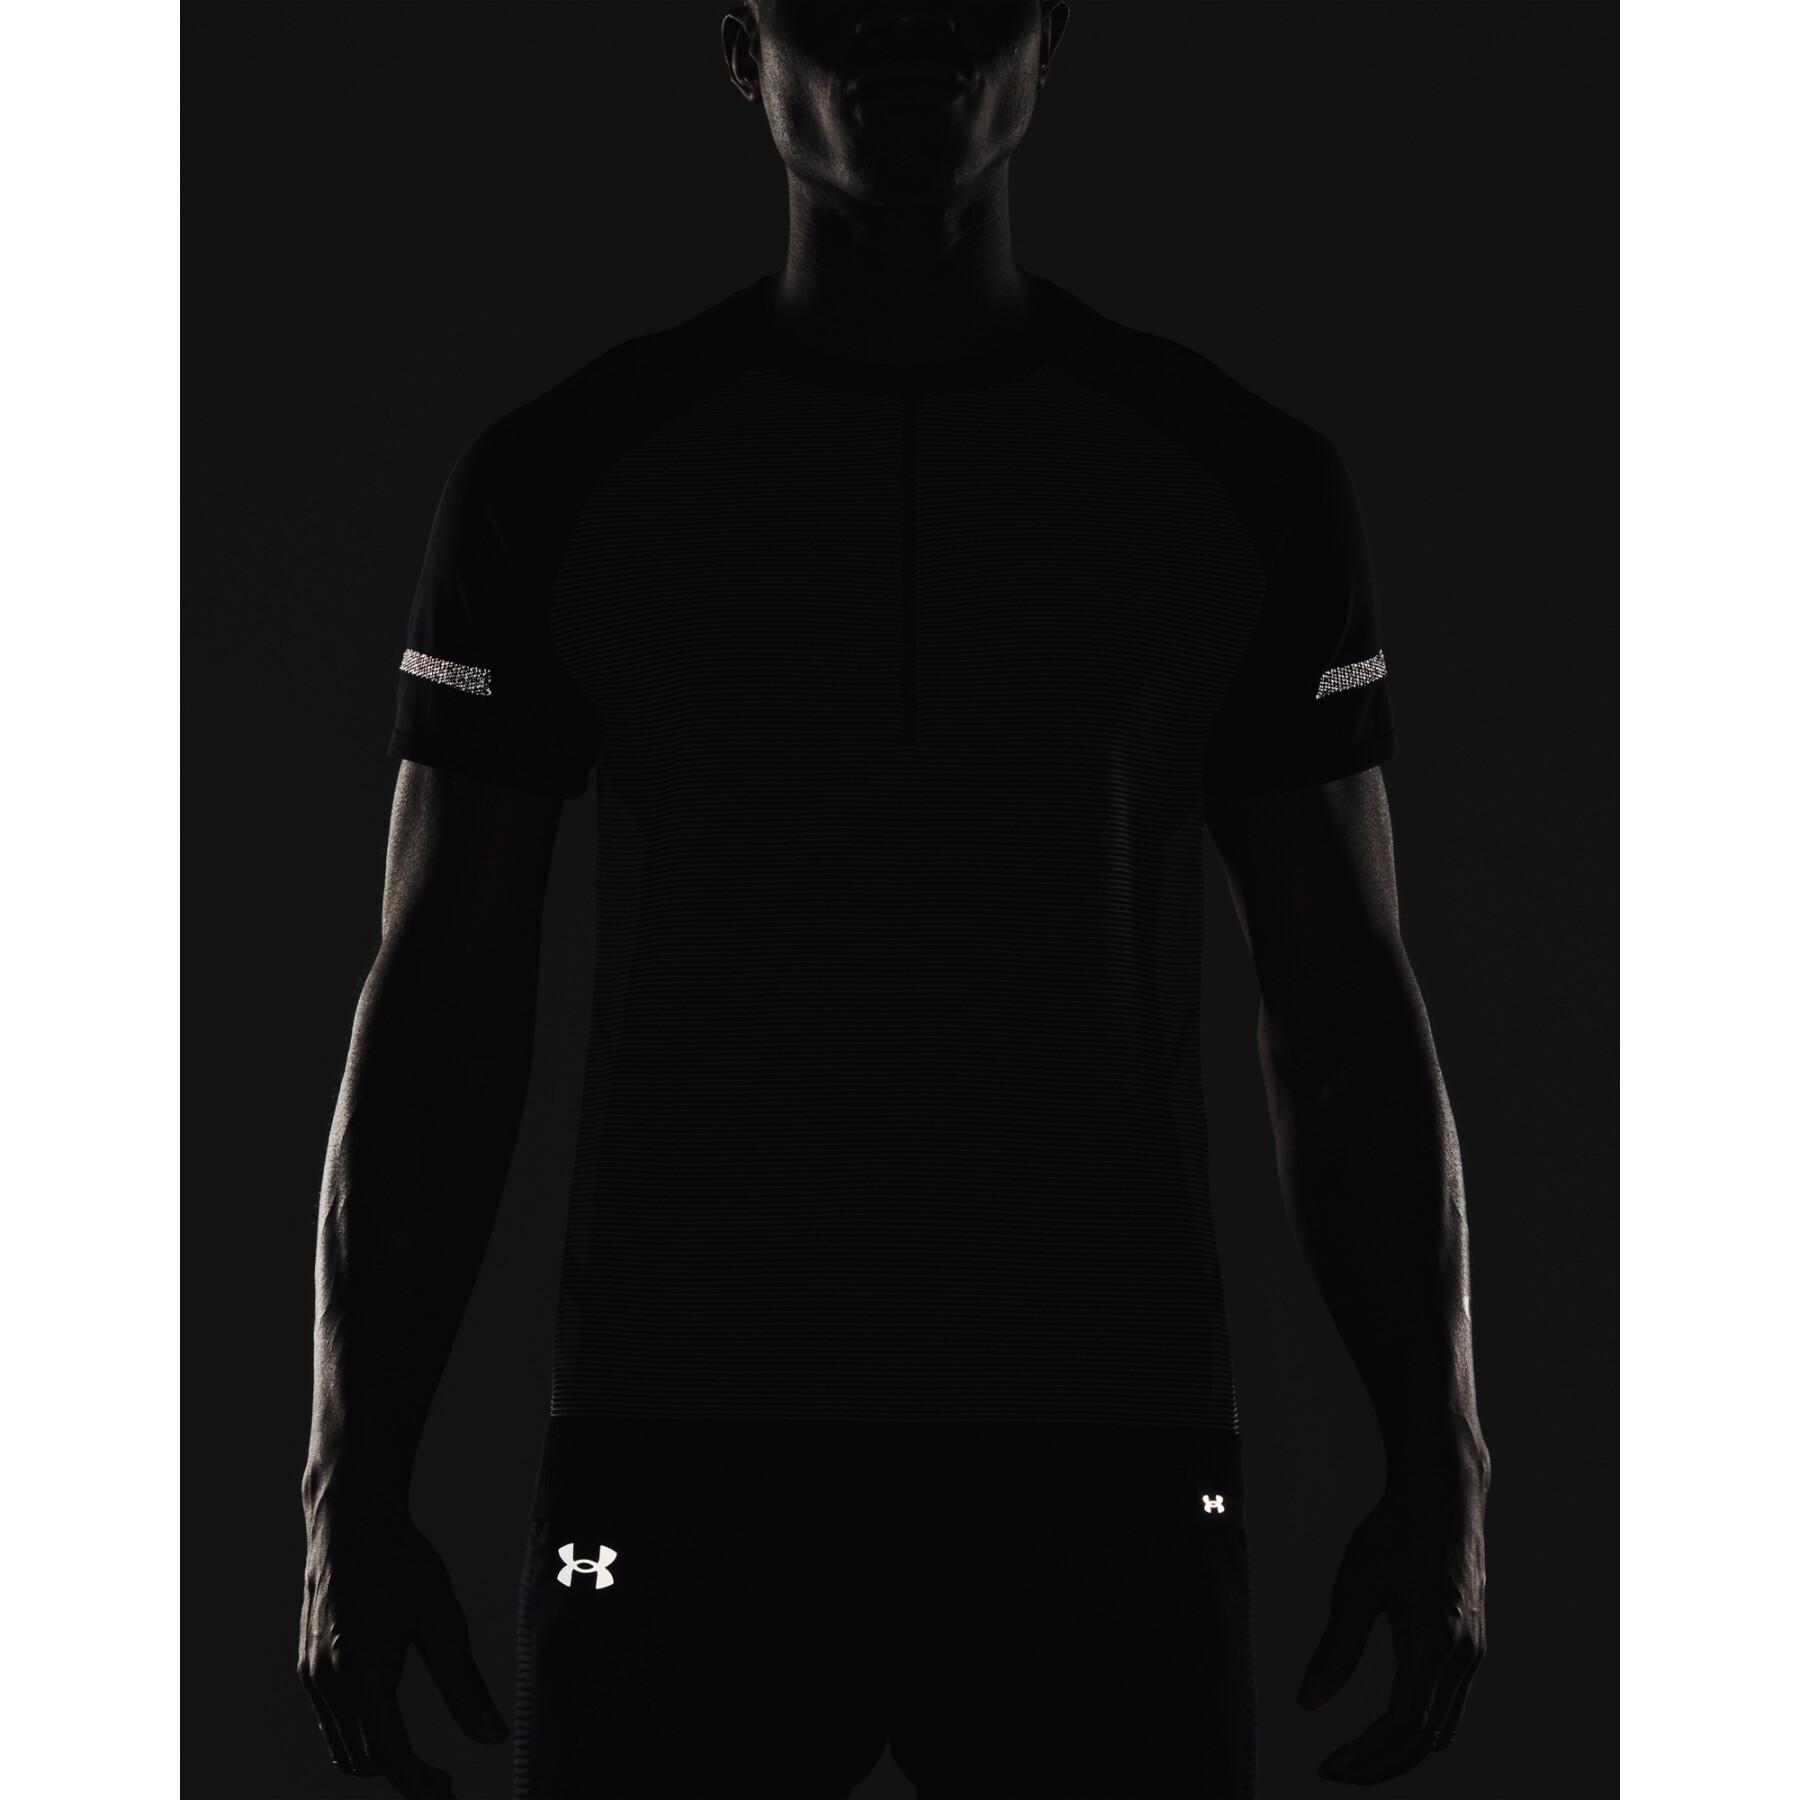 Maillot et 1/4 zip Under Armour IntelliKnit